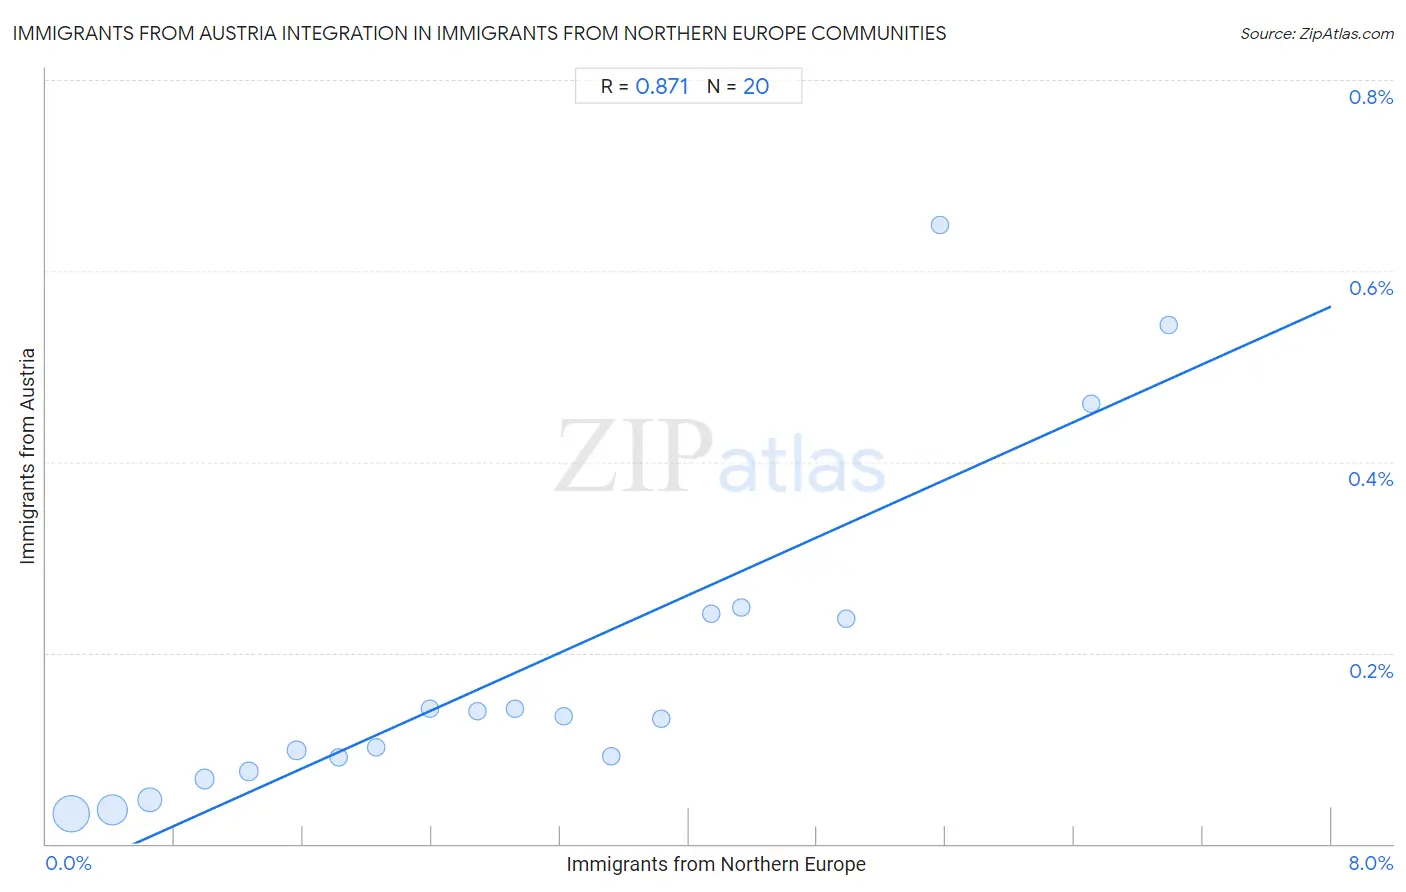 Immigrants from Northern Europe Integration in Immigrants from Austria Communities